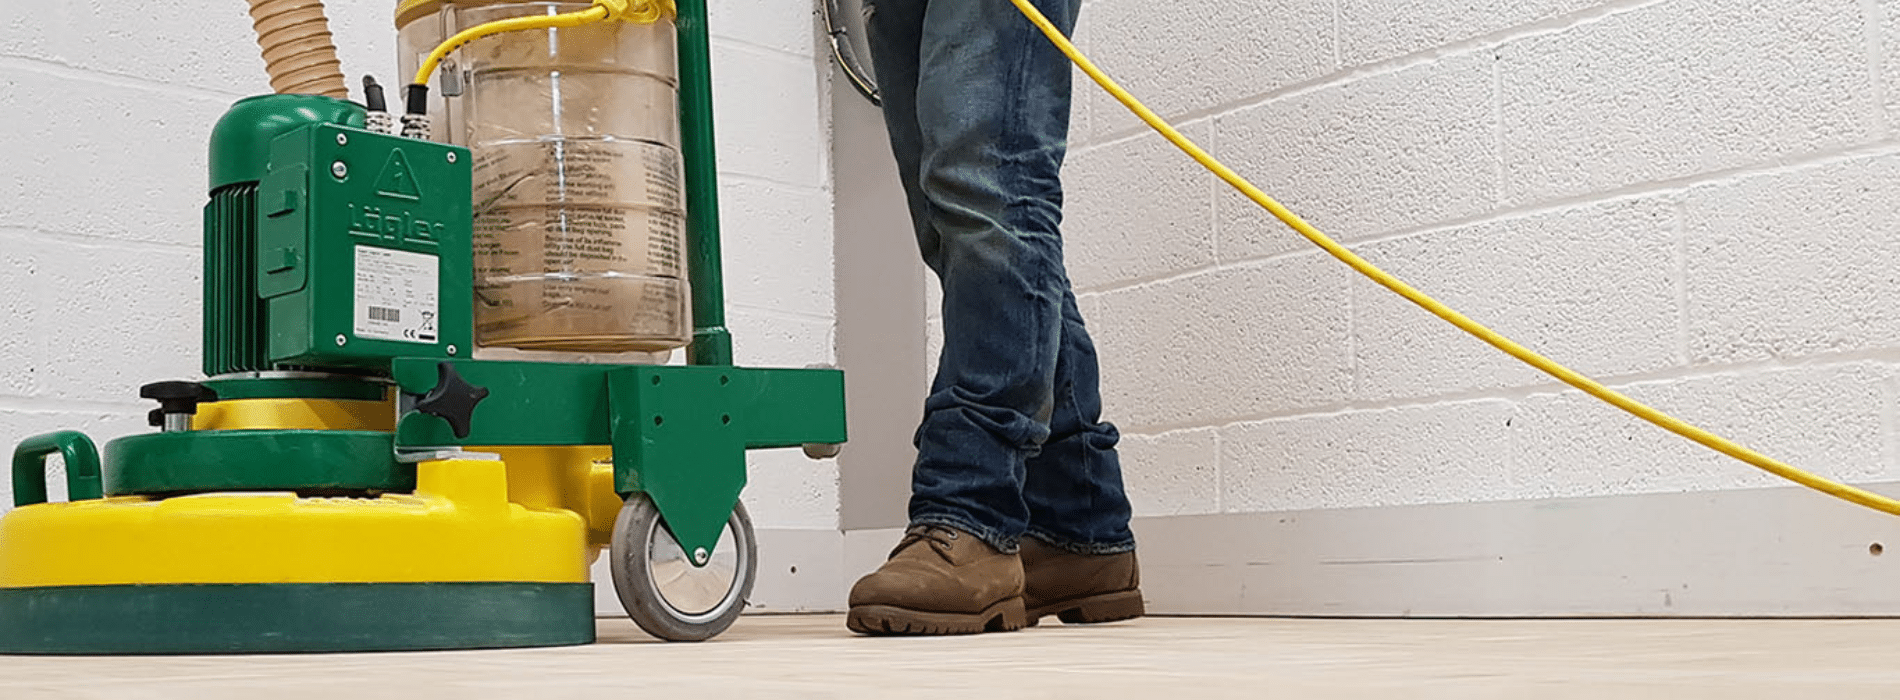 In Rotherhithe, SE15, Mr Sander® use the Bona FlexiSand 1.9, a powerful buffer sander (Ø 407 mm) with 1.9 kW effect, 230 V voltage, and 50 Hz/60 Hz frequency. It is connected to a dust extraction system equipped with a HEPA filter, ensuring a clean and efficient sanding process for parquet floors.